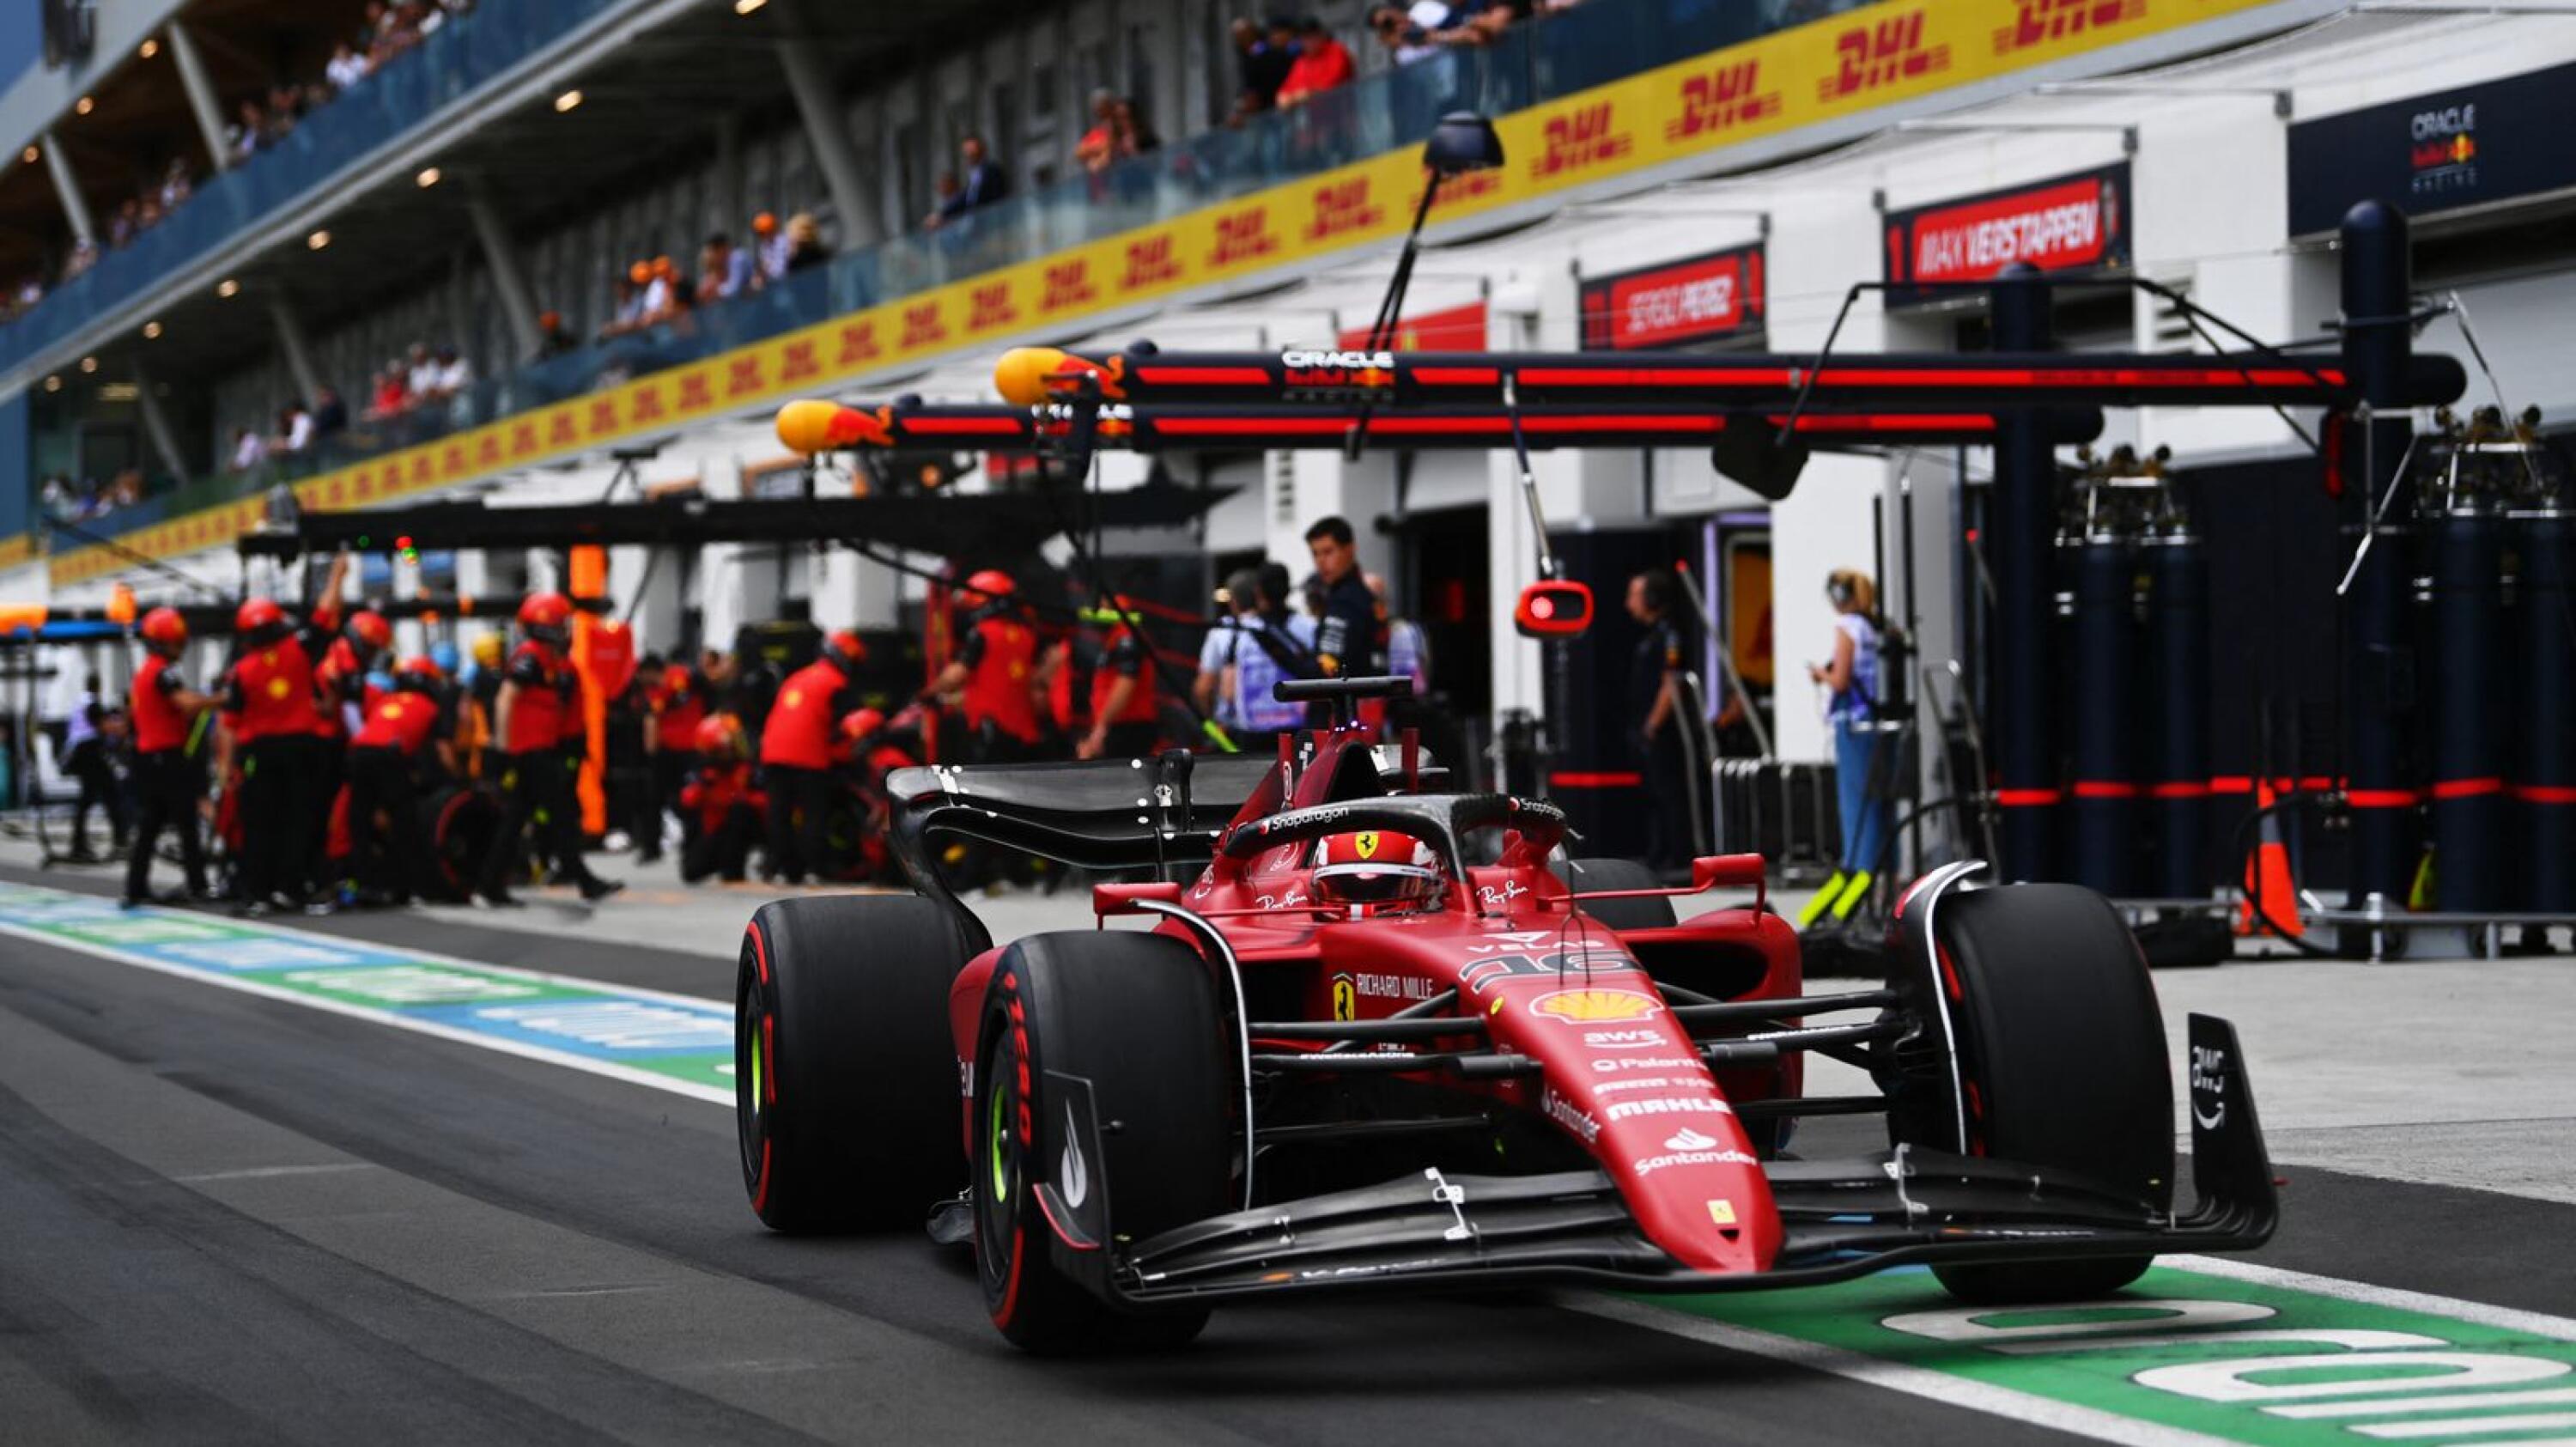 Charles Leclerc of Monaco driving the (16) Ferrari F1-75 in the Pitlane during practice ahead of the F1 Grand Prix of Canada at Circuit Gilles Villeneuve in Montreal, Quebec on Friday